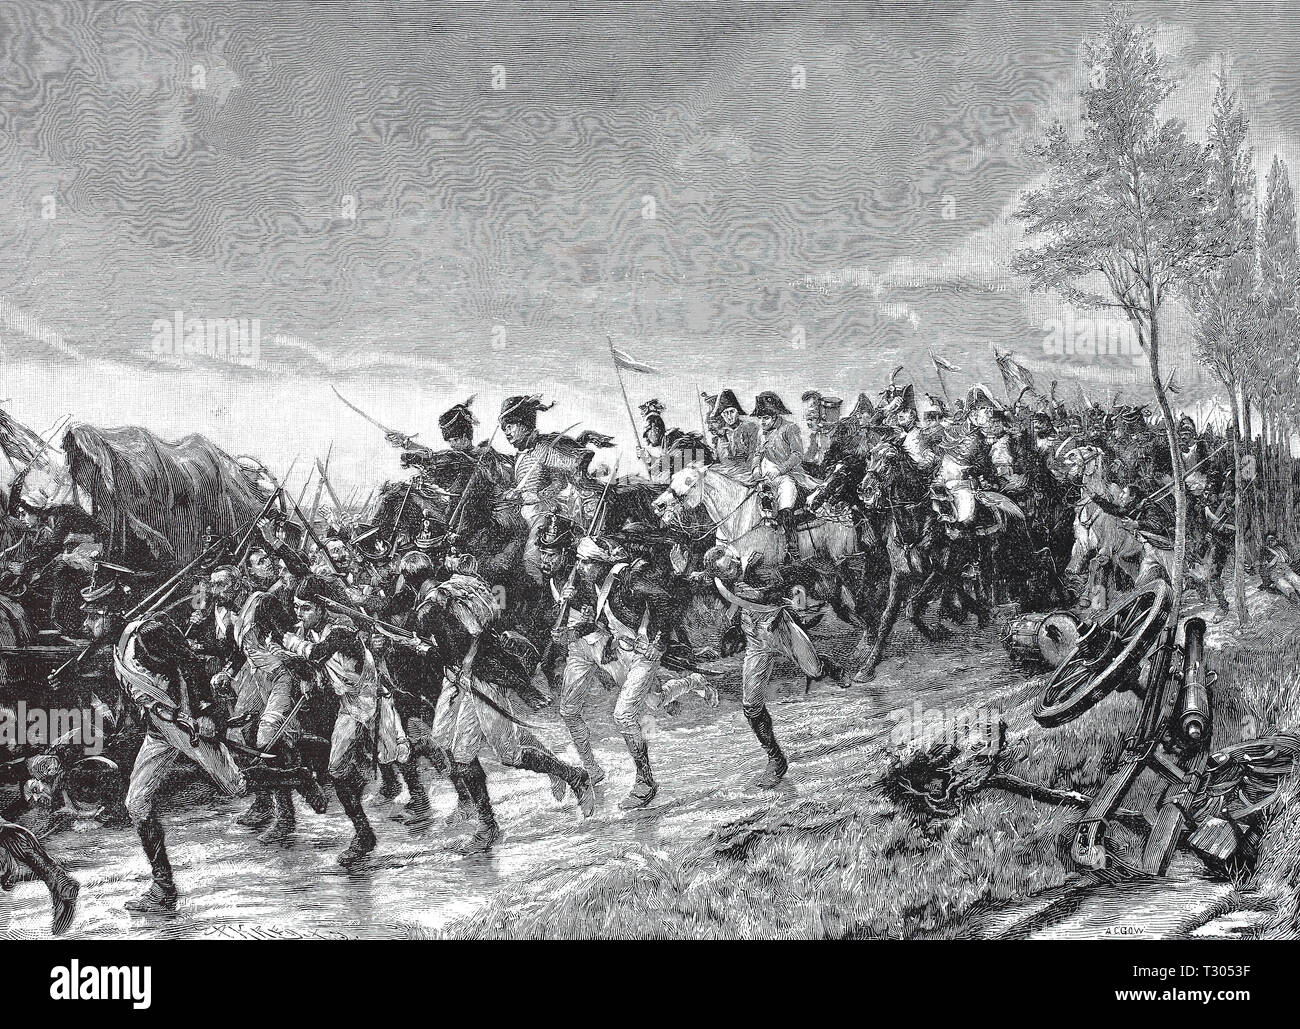 Digital improved reproduction, The escape of Napoleon and his troops after the battle with Belle-Alliance, Die Flucht von Napoleon und seinen Truppen nach der Schlacht bei Belle-Alliance, from an original print from the 19th century Stock Photo